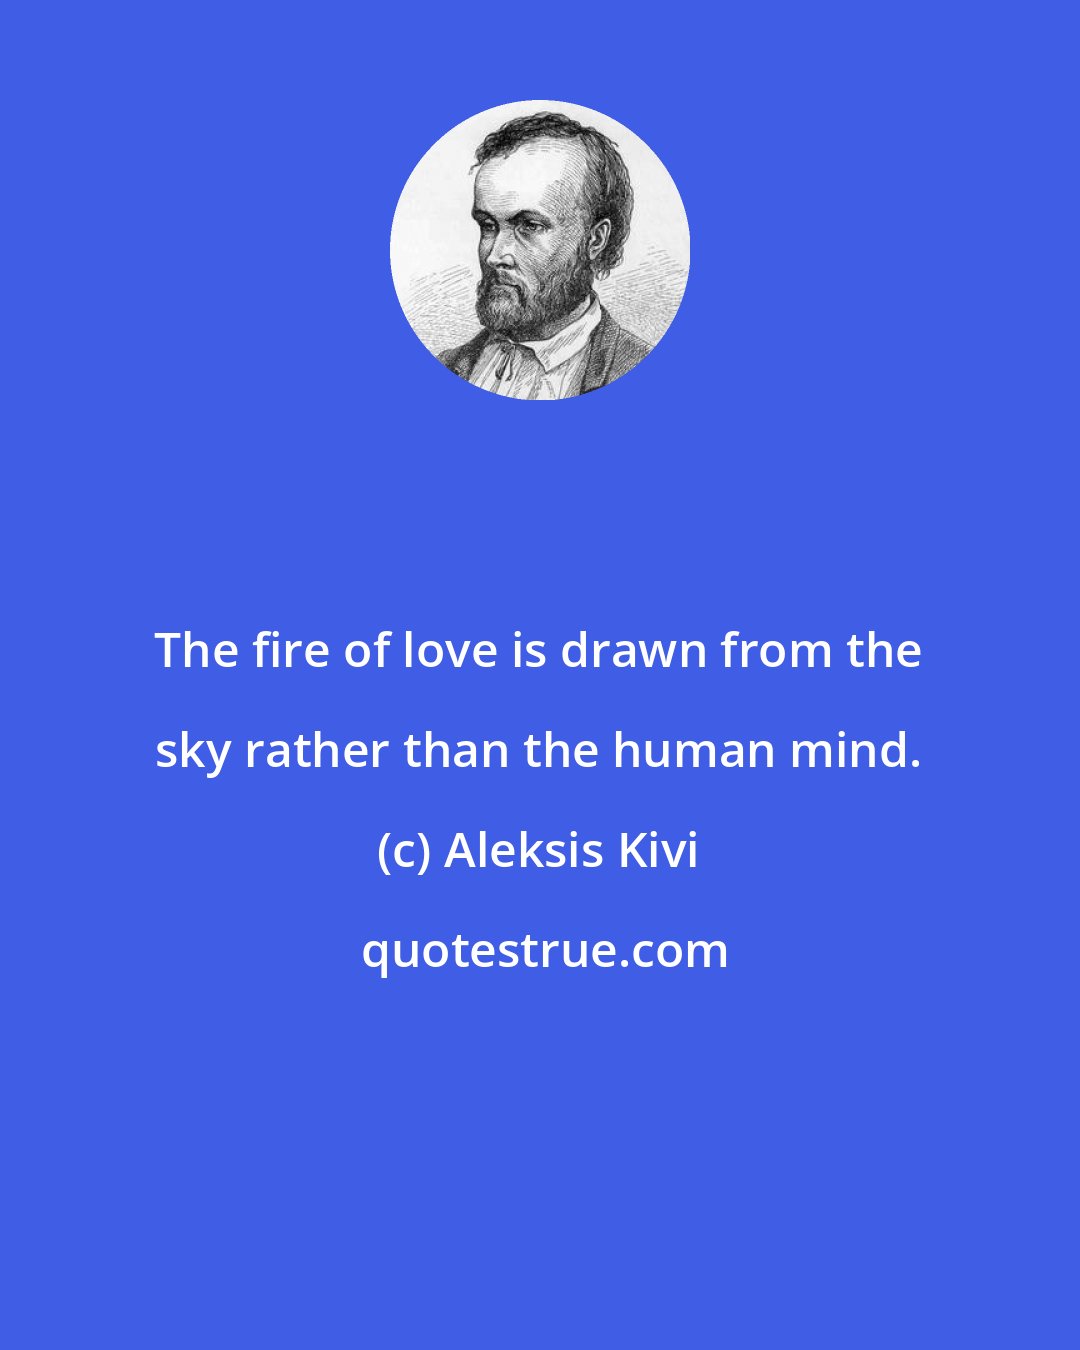 Aleksis Kivi: The fire of love is drawn from the sky rather than the human mind.